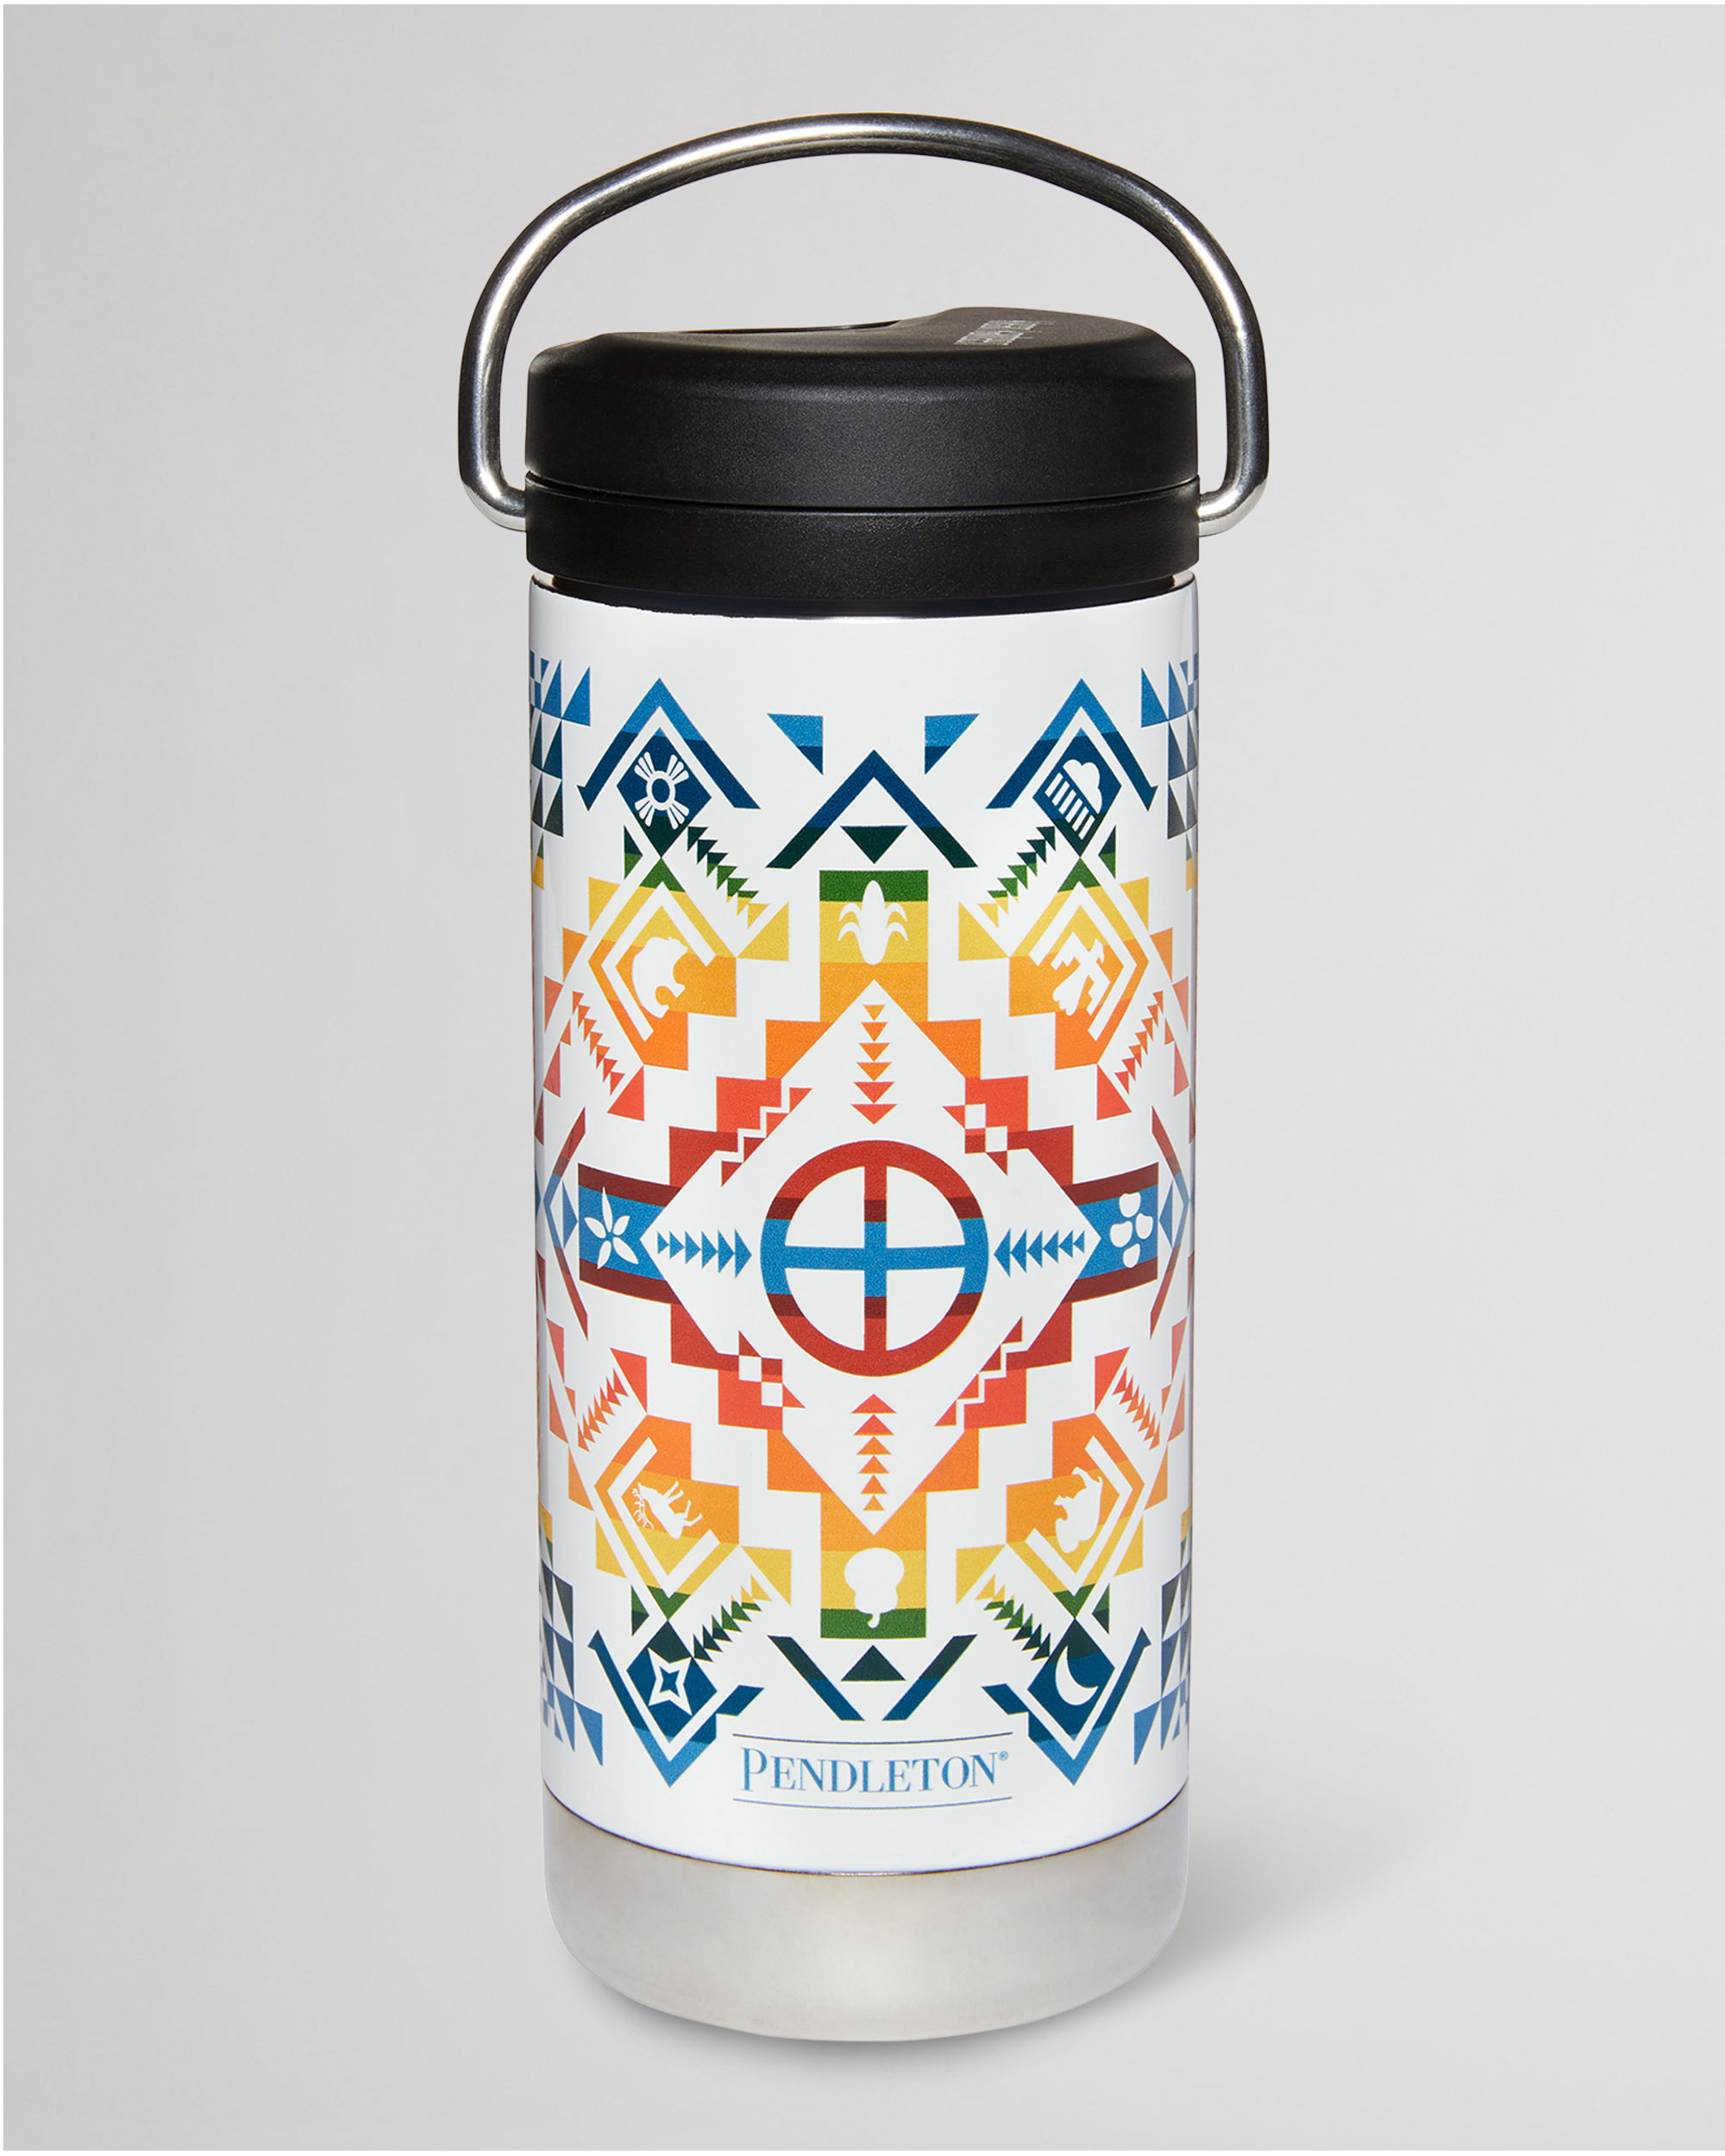 Pendleton Beach New Hampshire 20 oz Insulated Stainless Steel Tumbler   